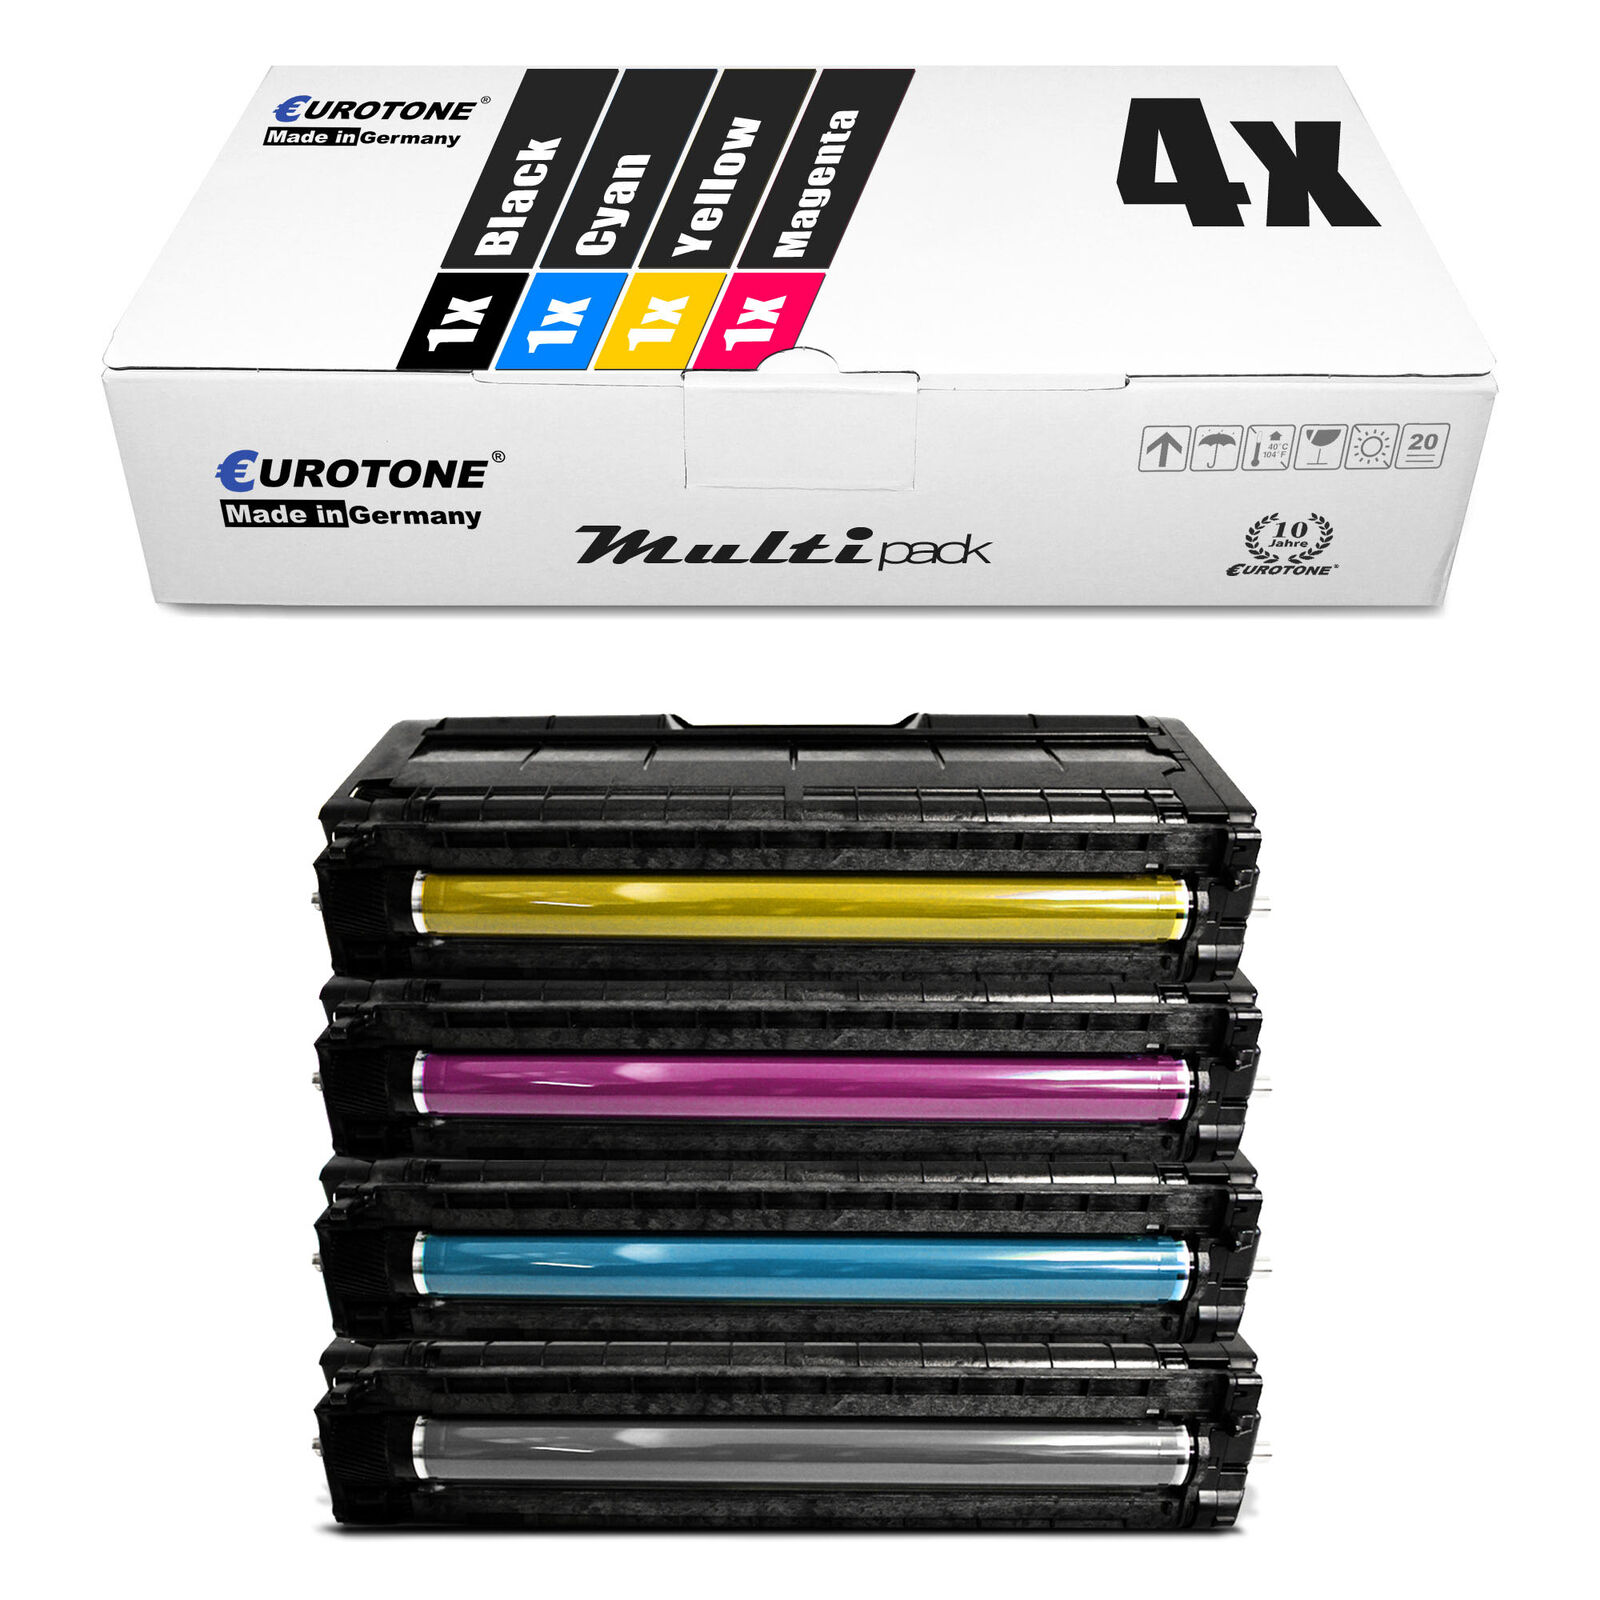 4x Eco Ink Cartridge for Ricoh SP C-252-sf